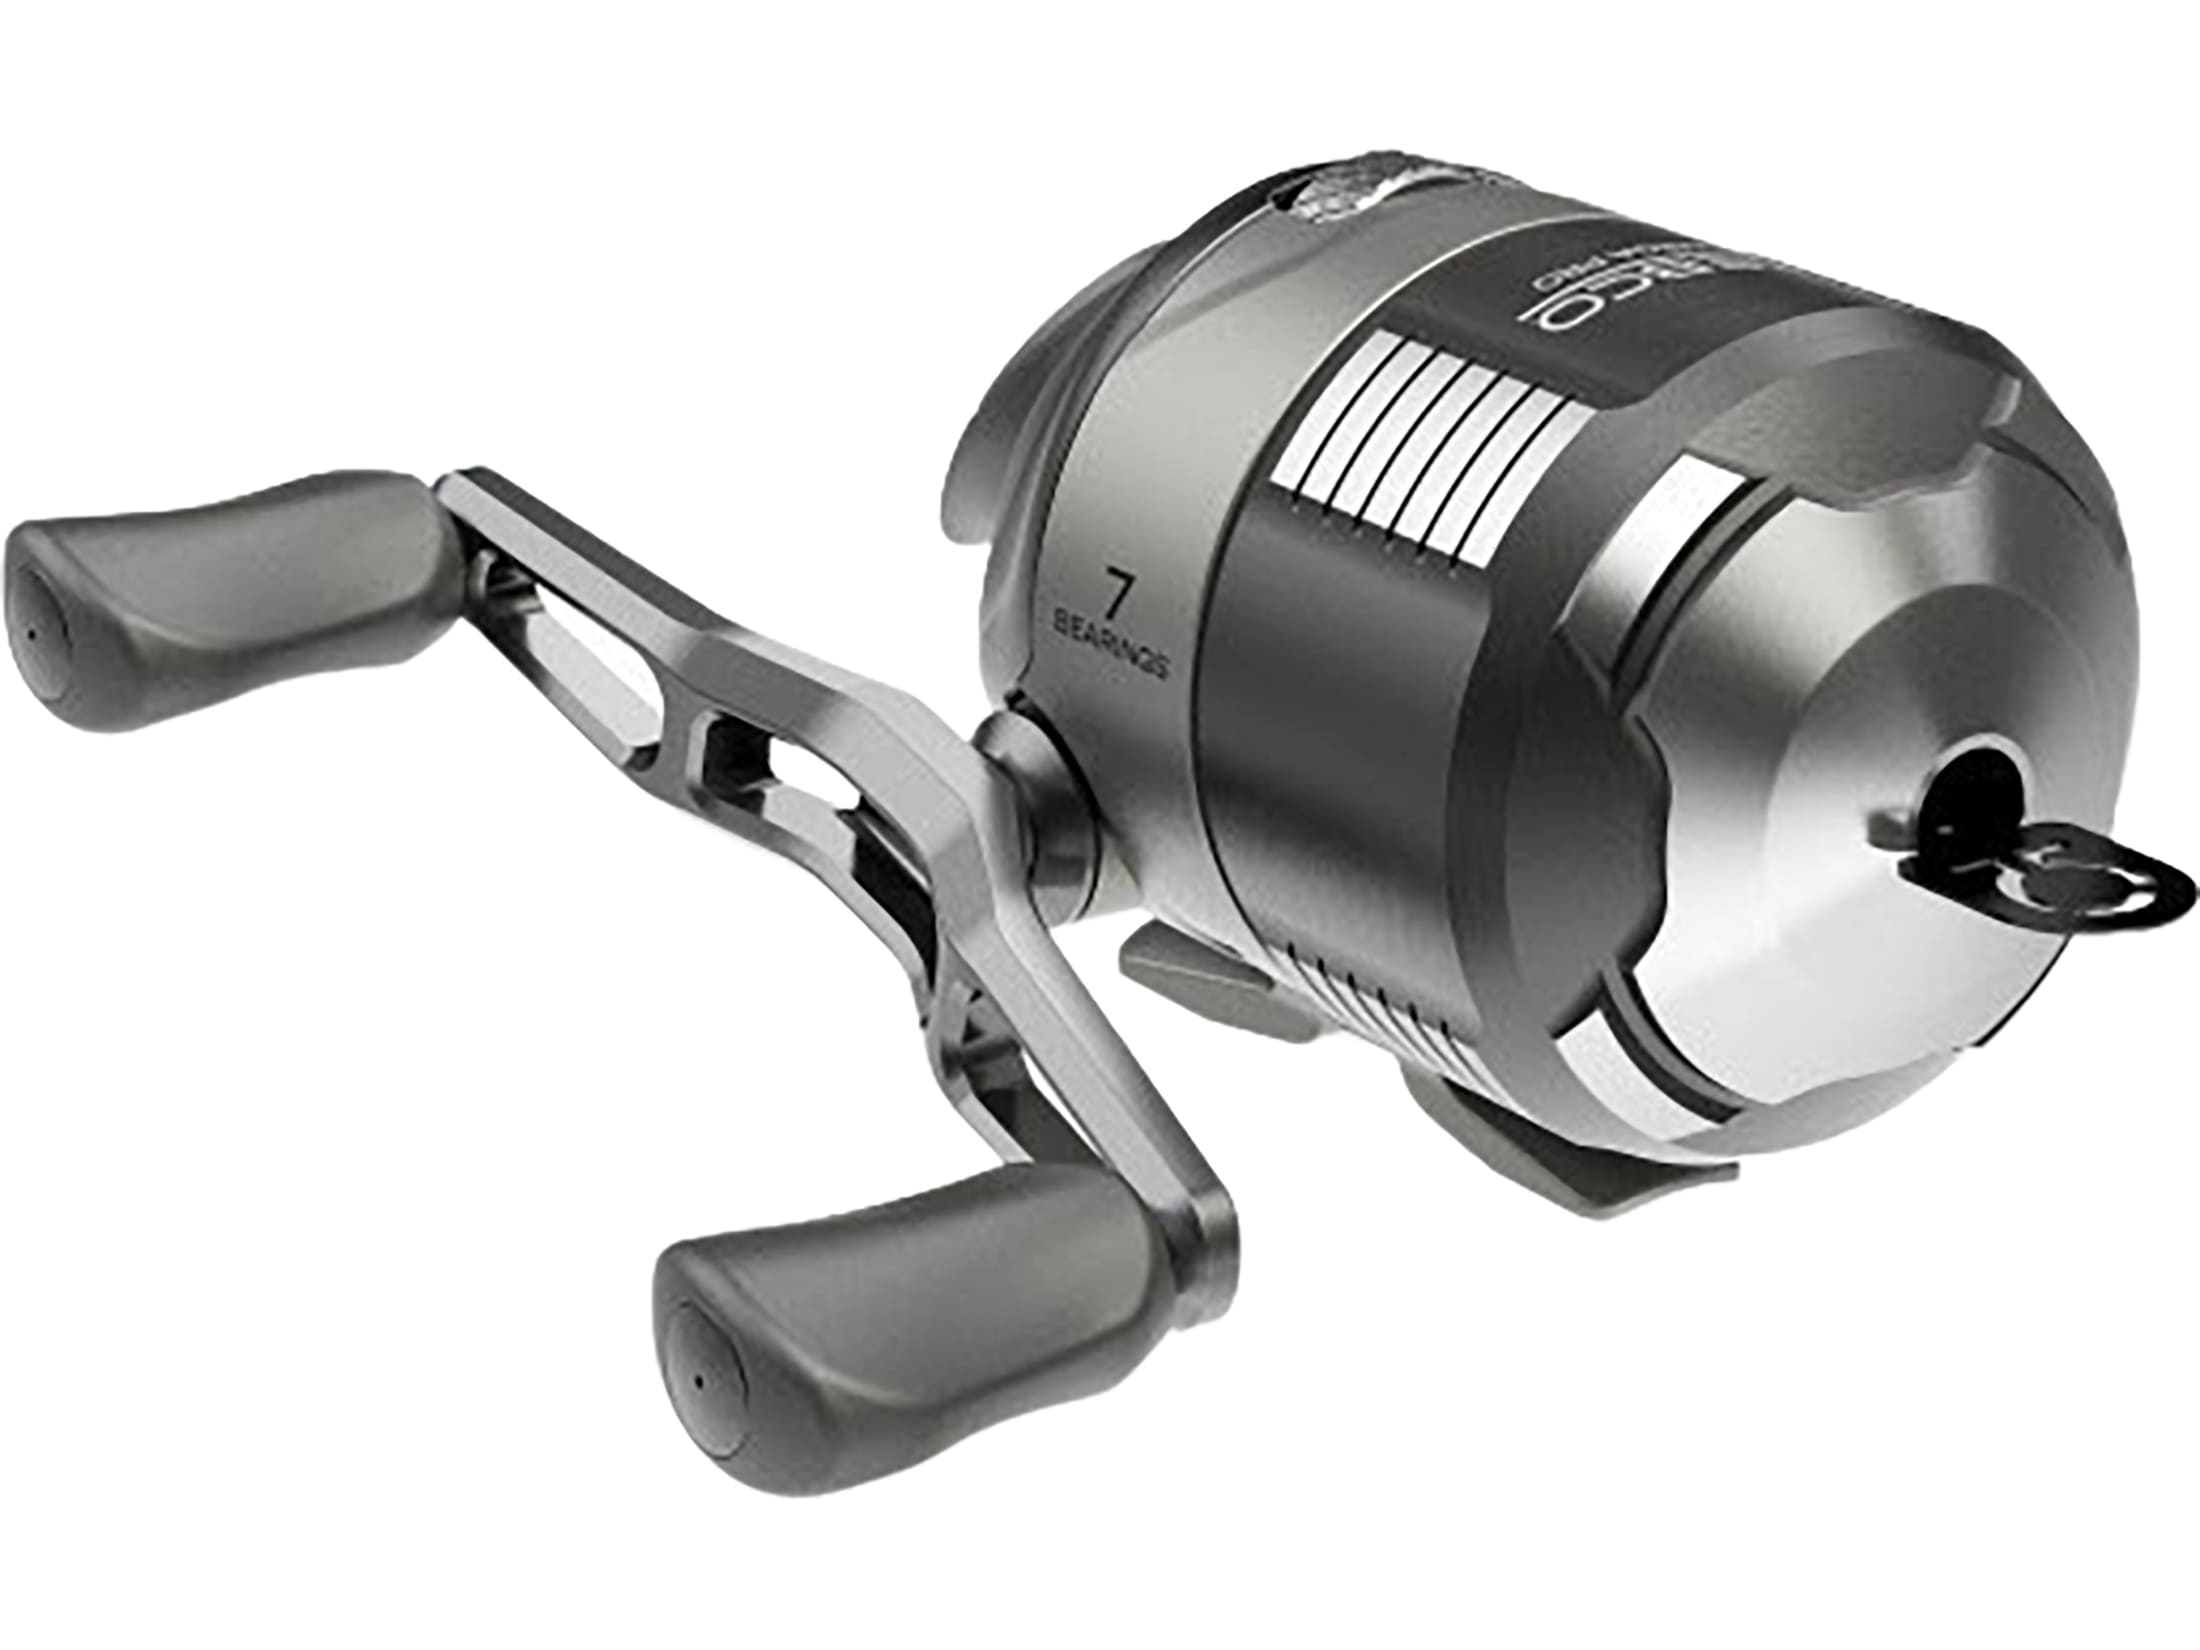 Bullet Spincast Fishing Reel Pre-Spooled with 10lb